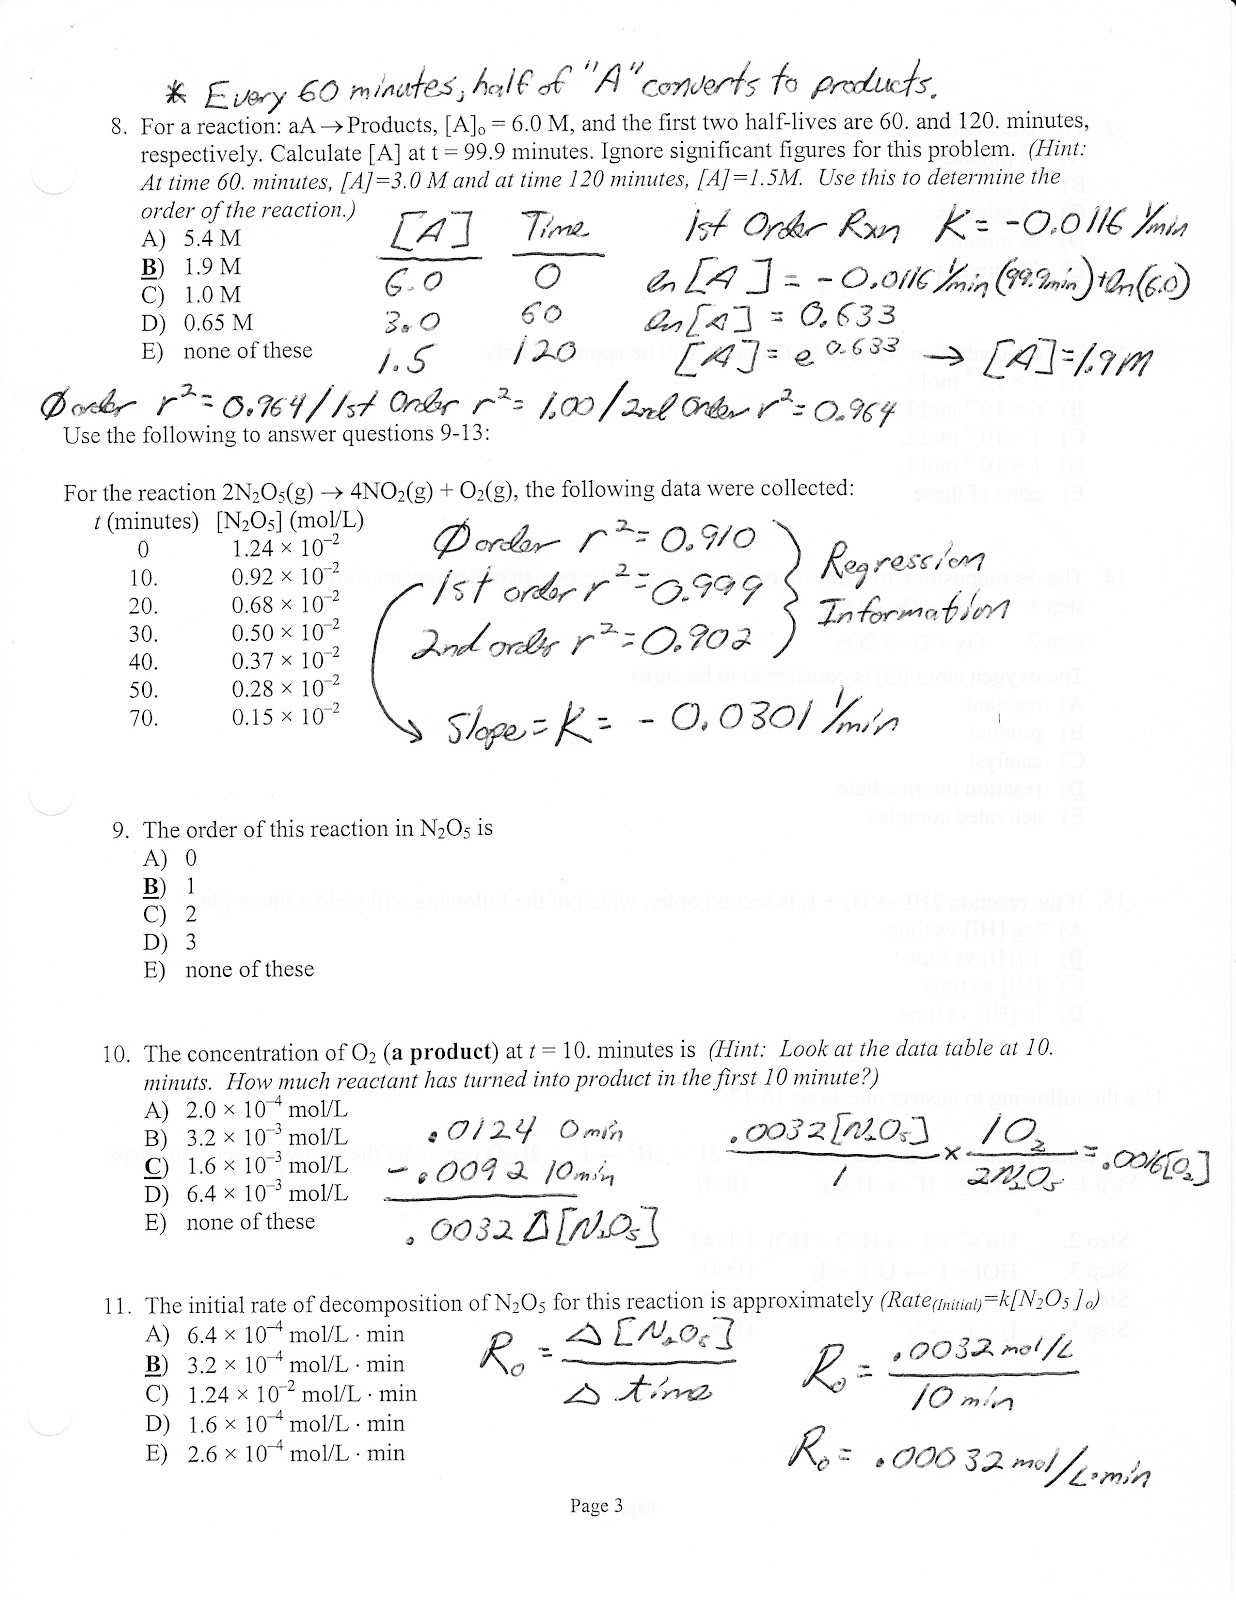 Chemical Reaction Worksheet Answers together with Library Worksheet Chemistry 6eb49d312a9b Battk